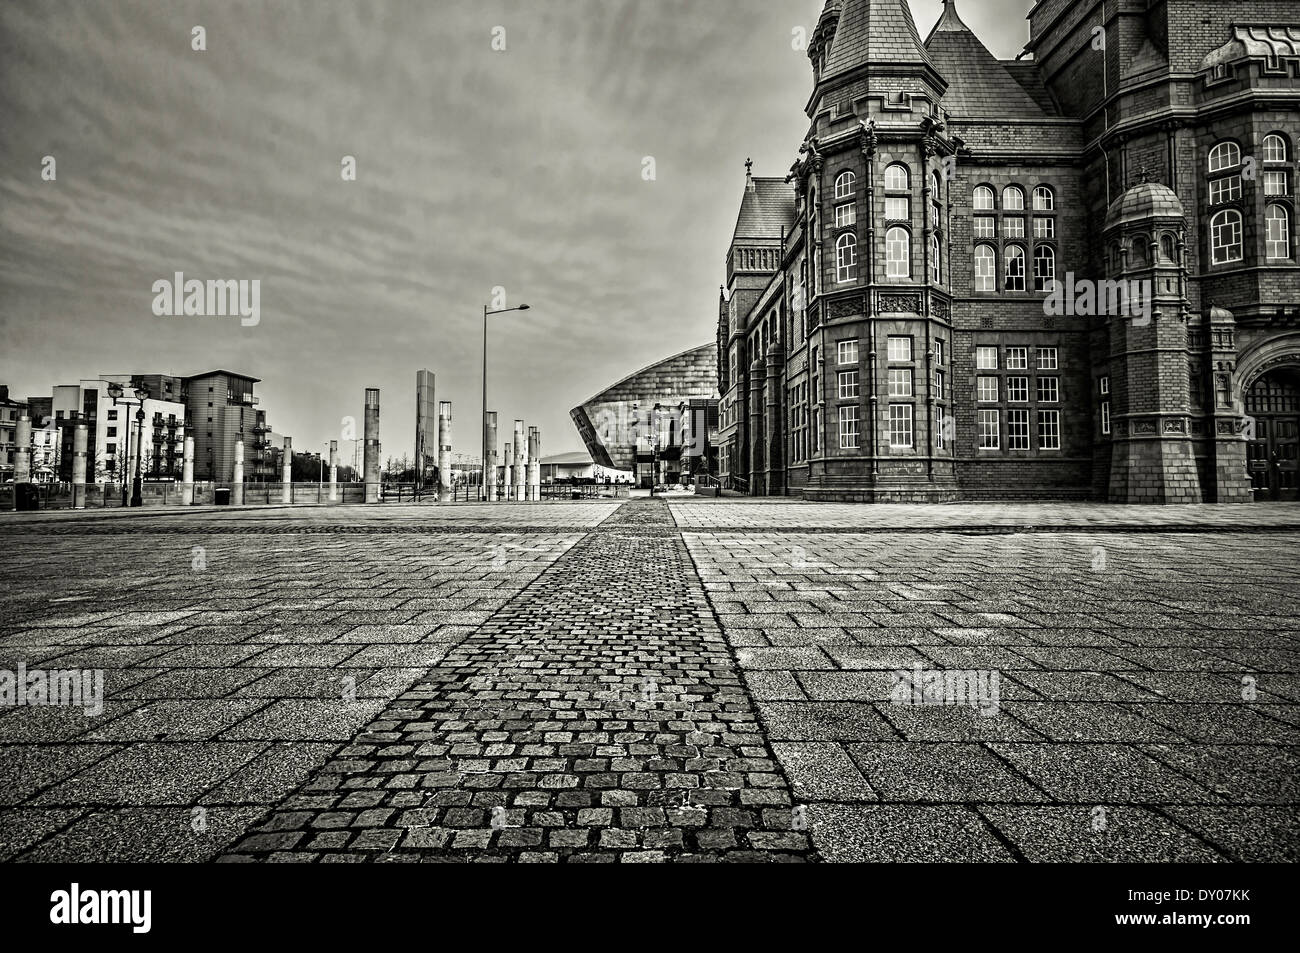 Cardiff Bay in the city of Cardiff, Wales in the United Kingdom Stock Photo